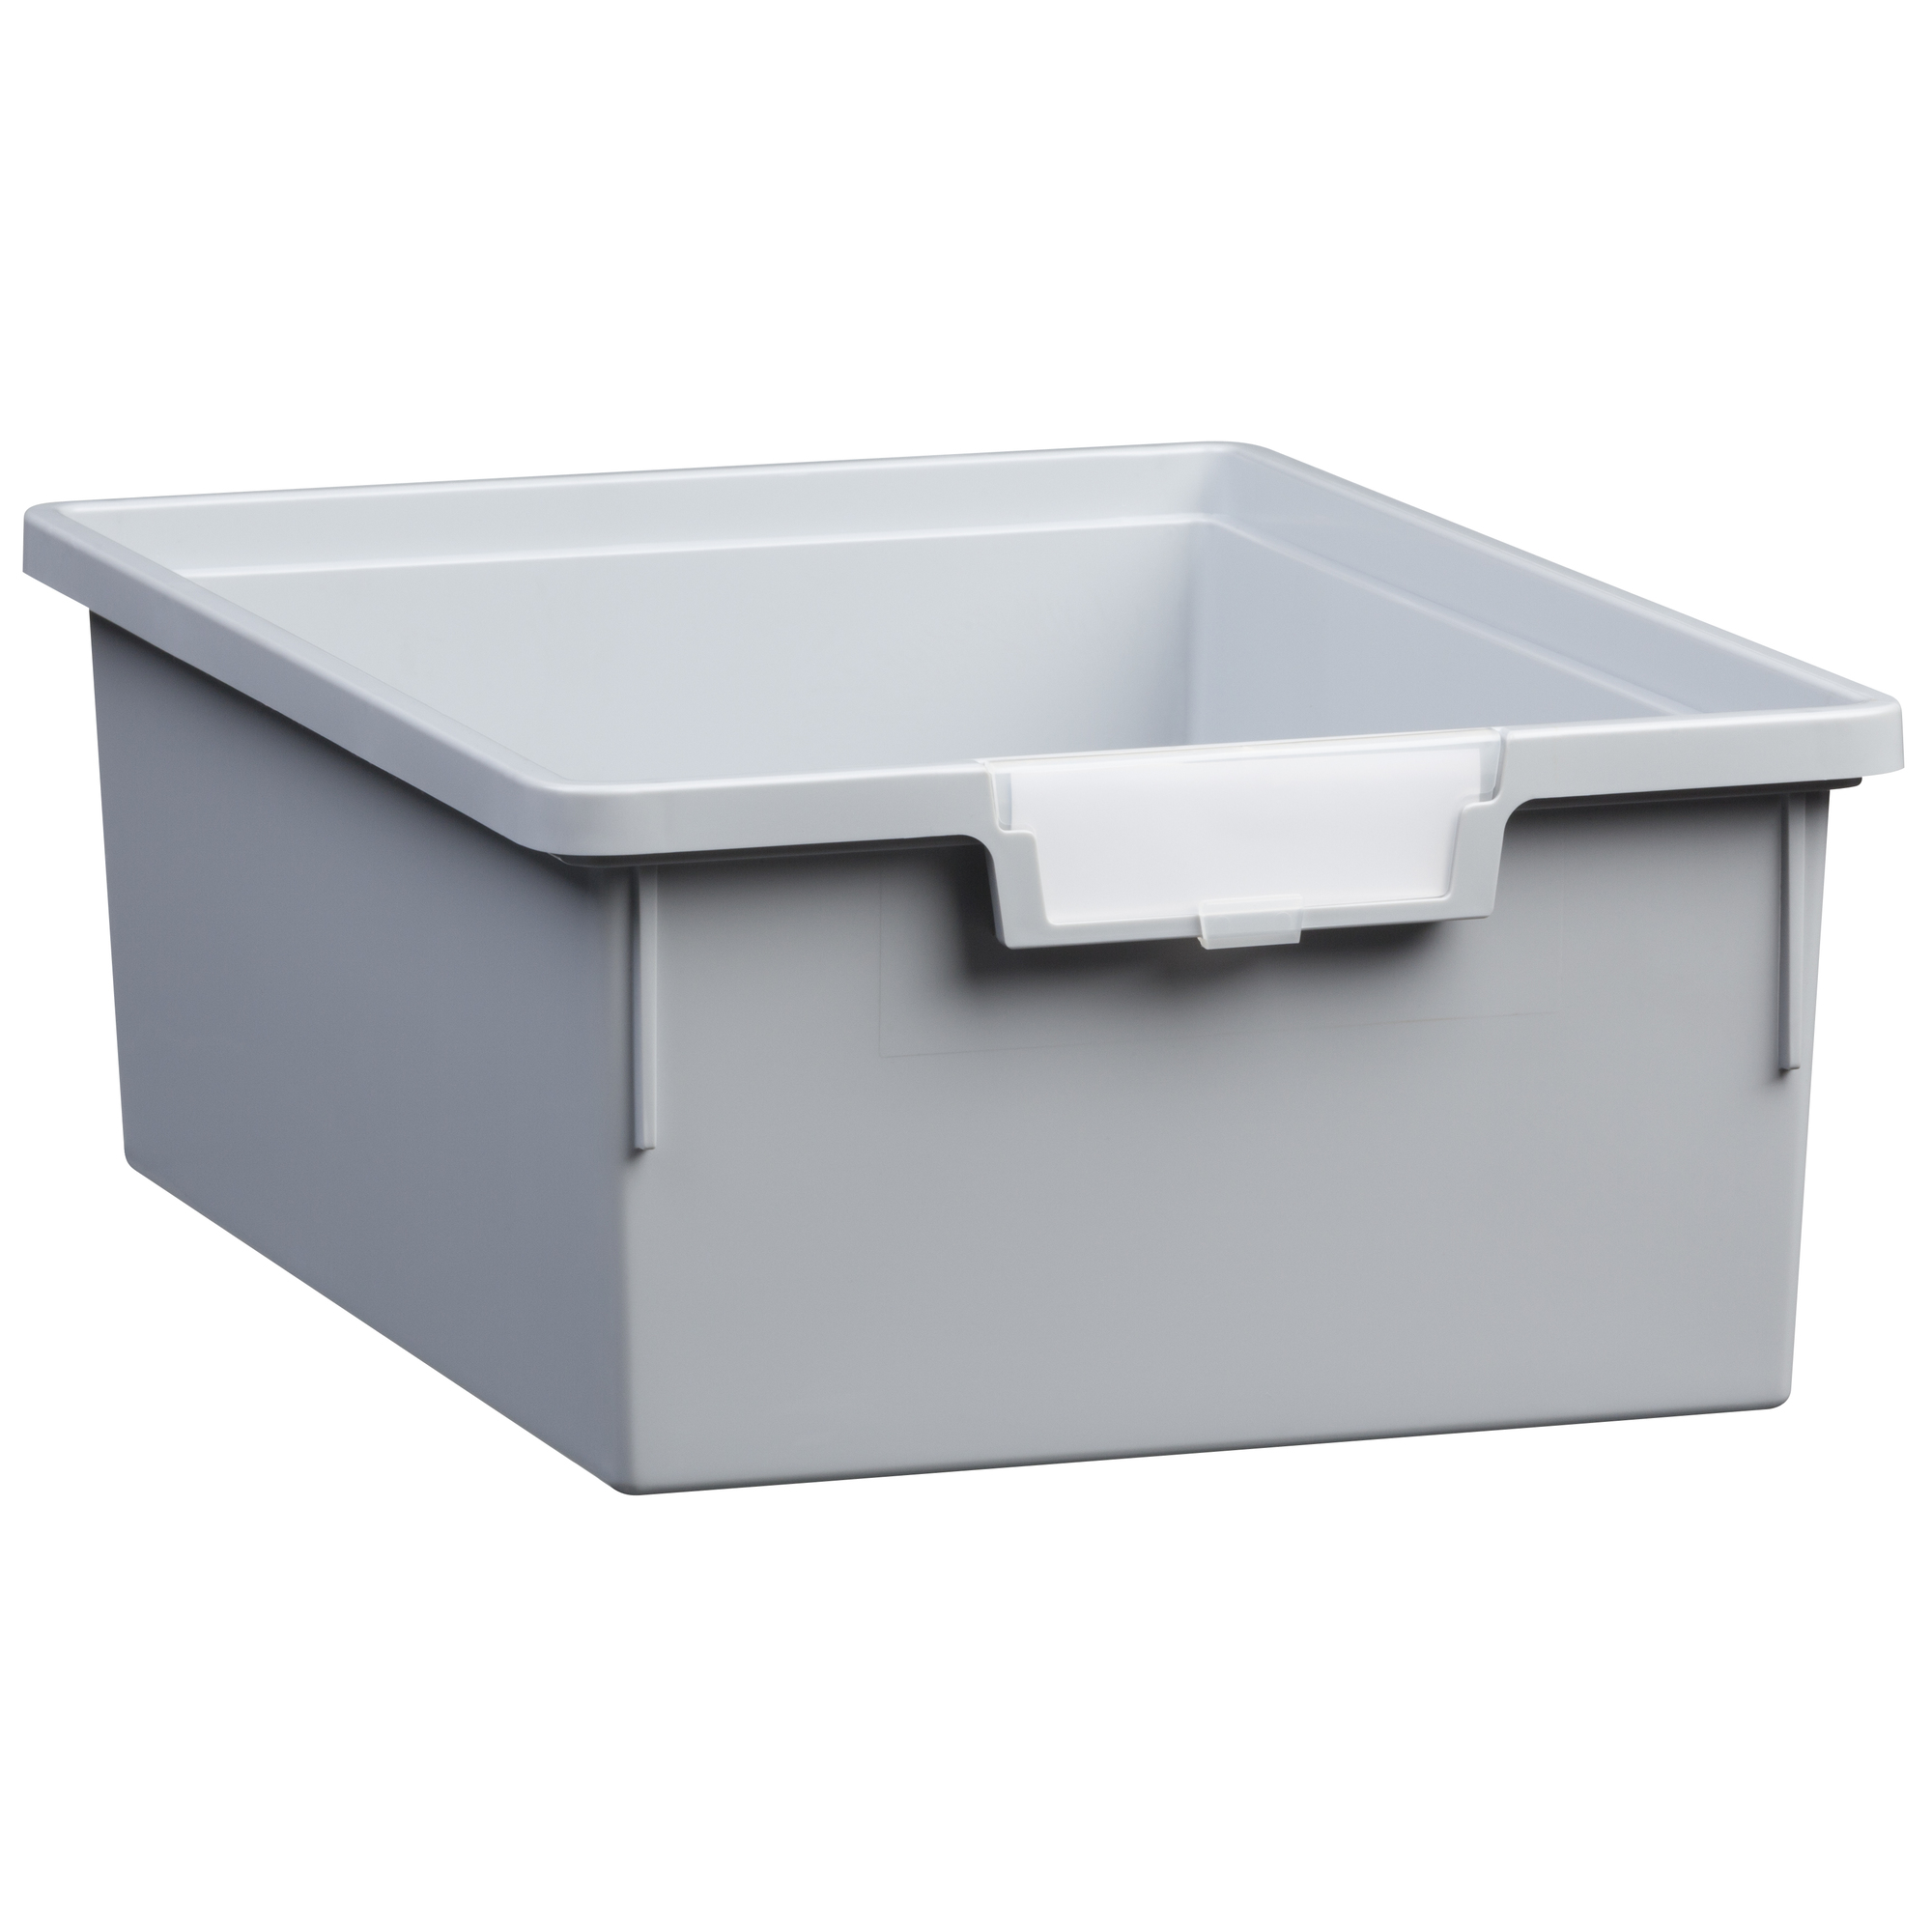 Certwood StorWerks, Slim Line 6Inch Tray in Light Gray-1PK, Included (qty.) 1 Height 6 in, Model CE1952LG1